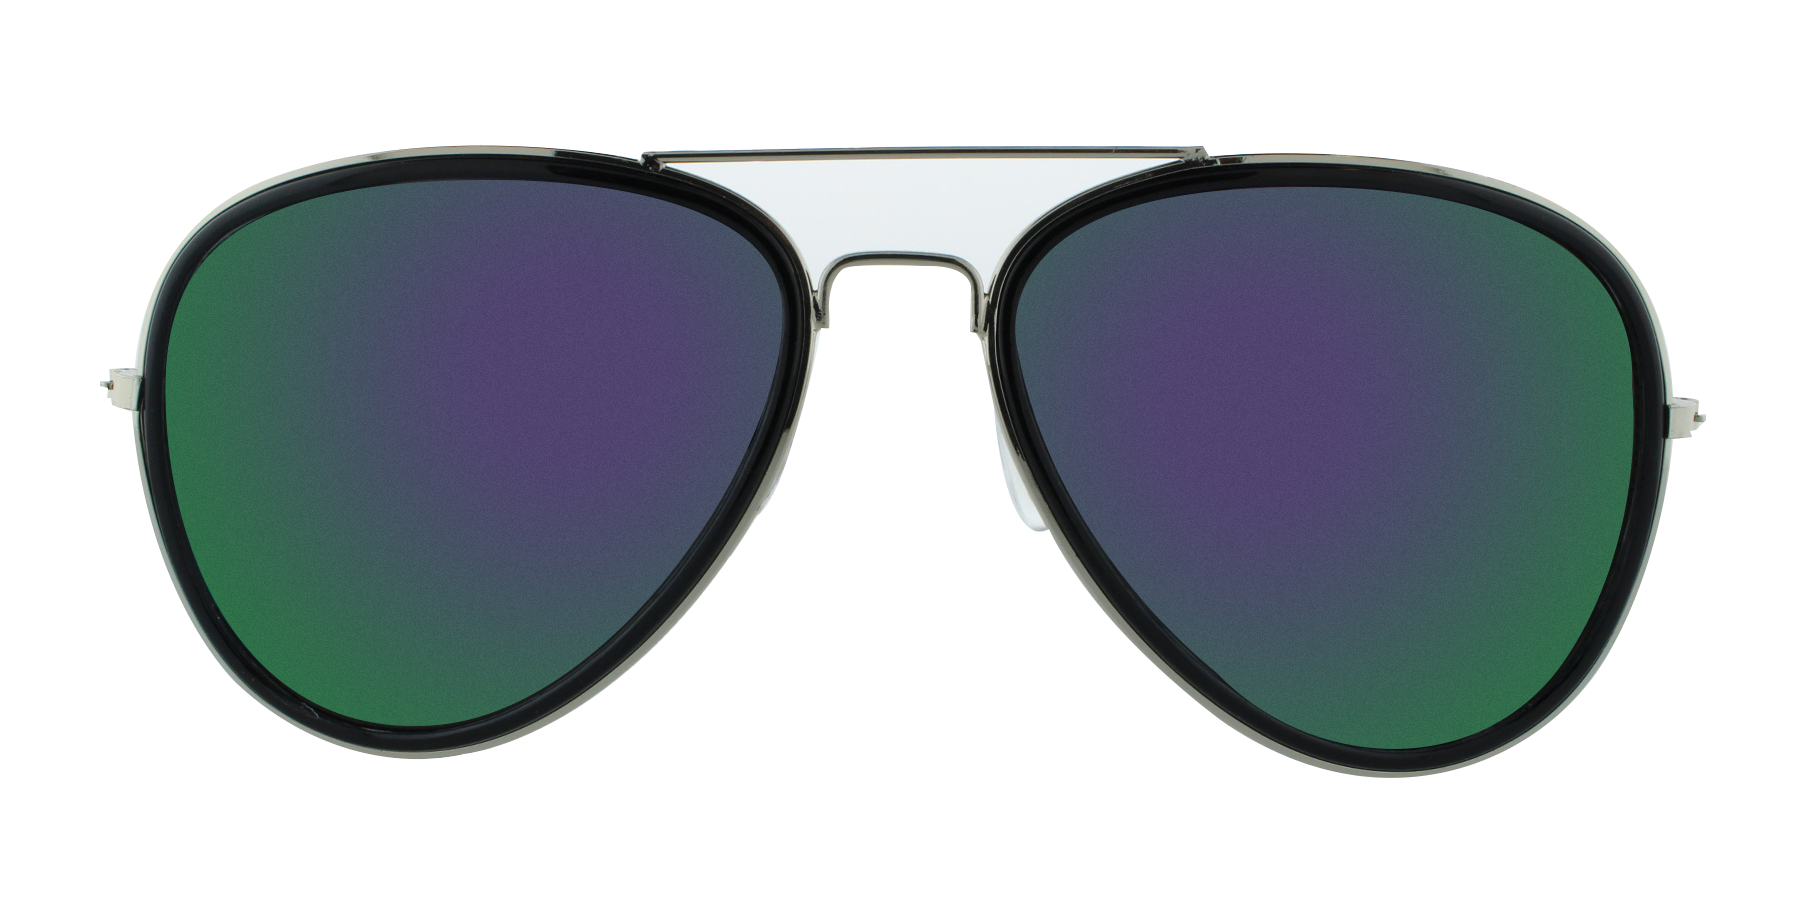 Drone -  Classic Aviator with Black Rim and Silver Frame (Iridescent Mirror)